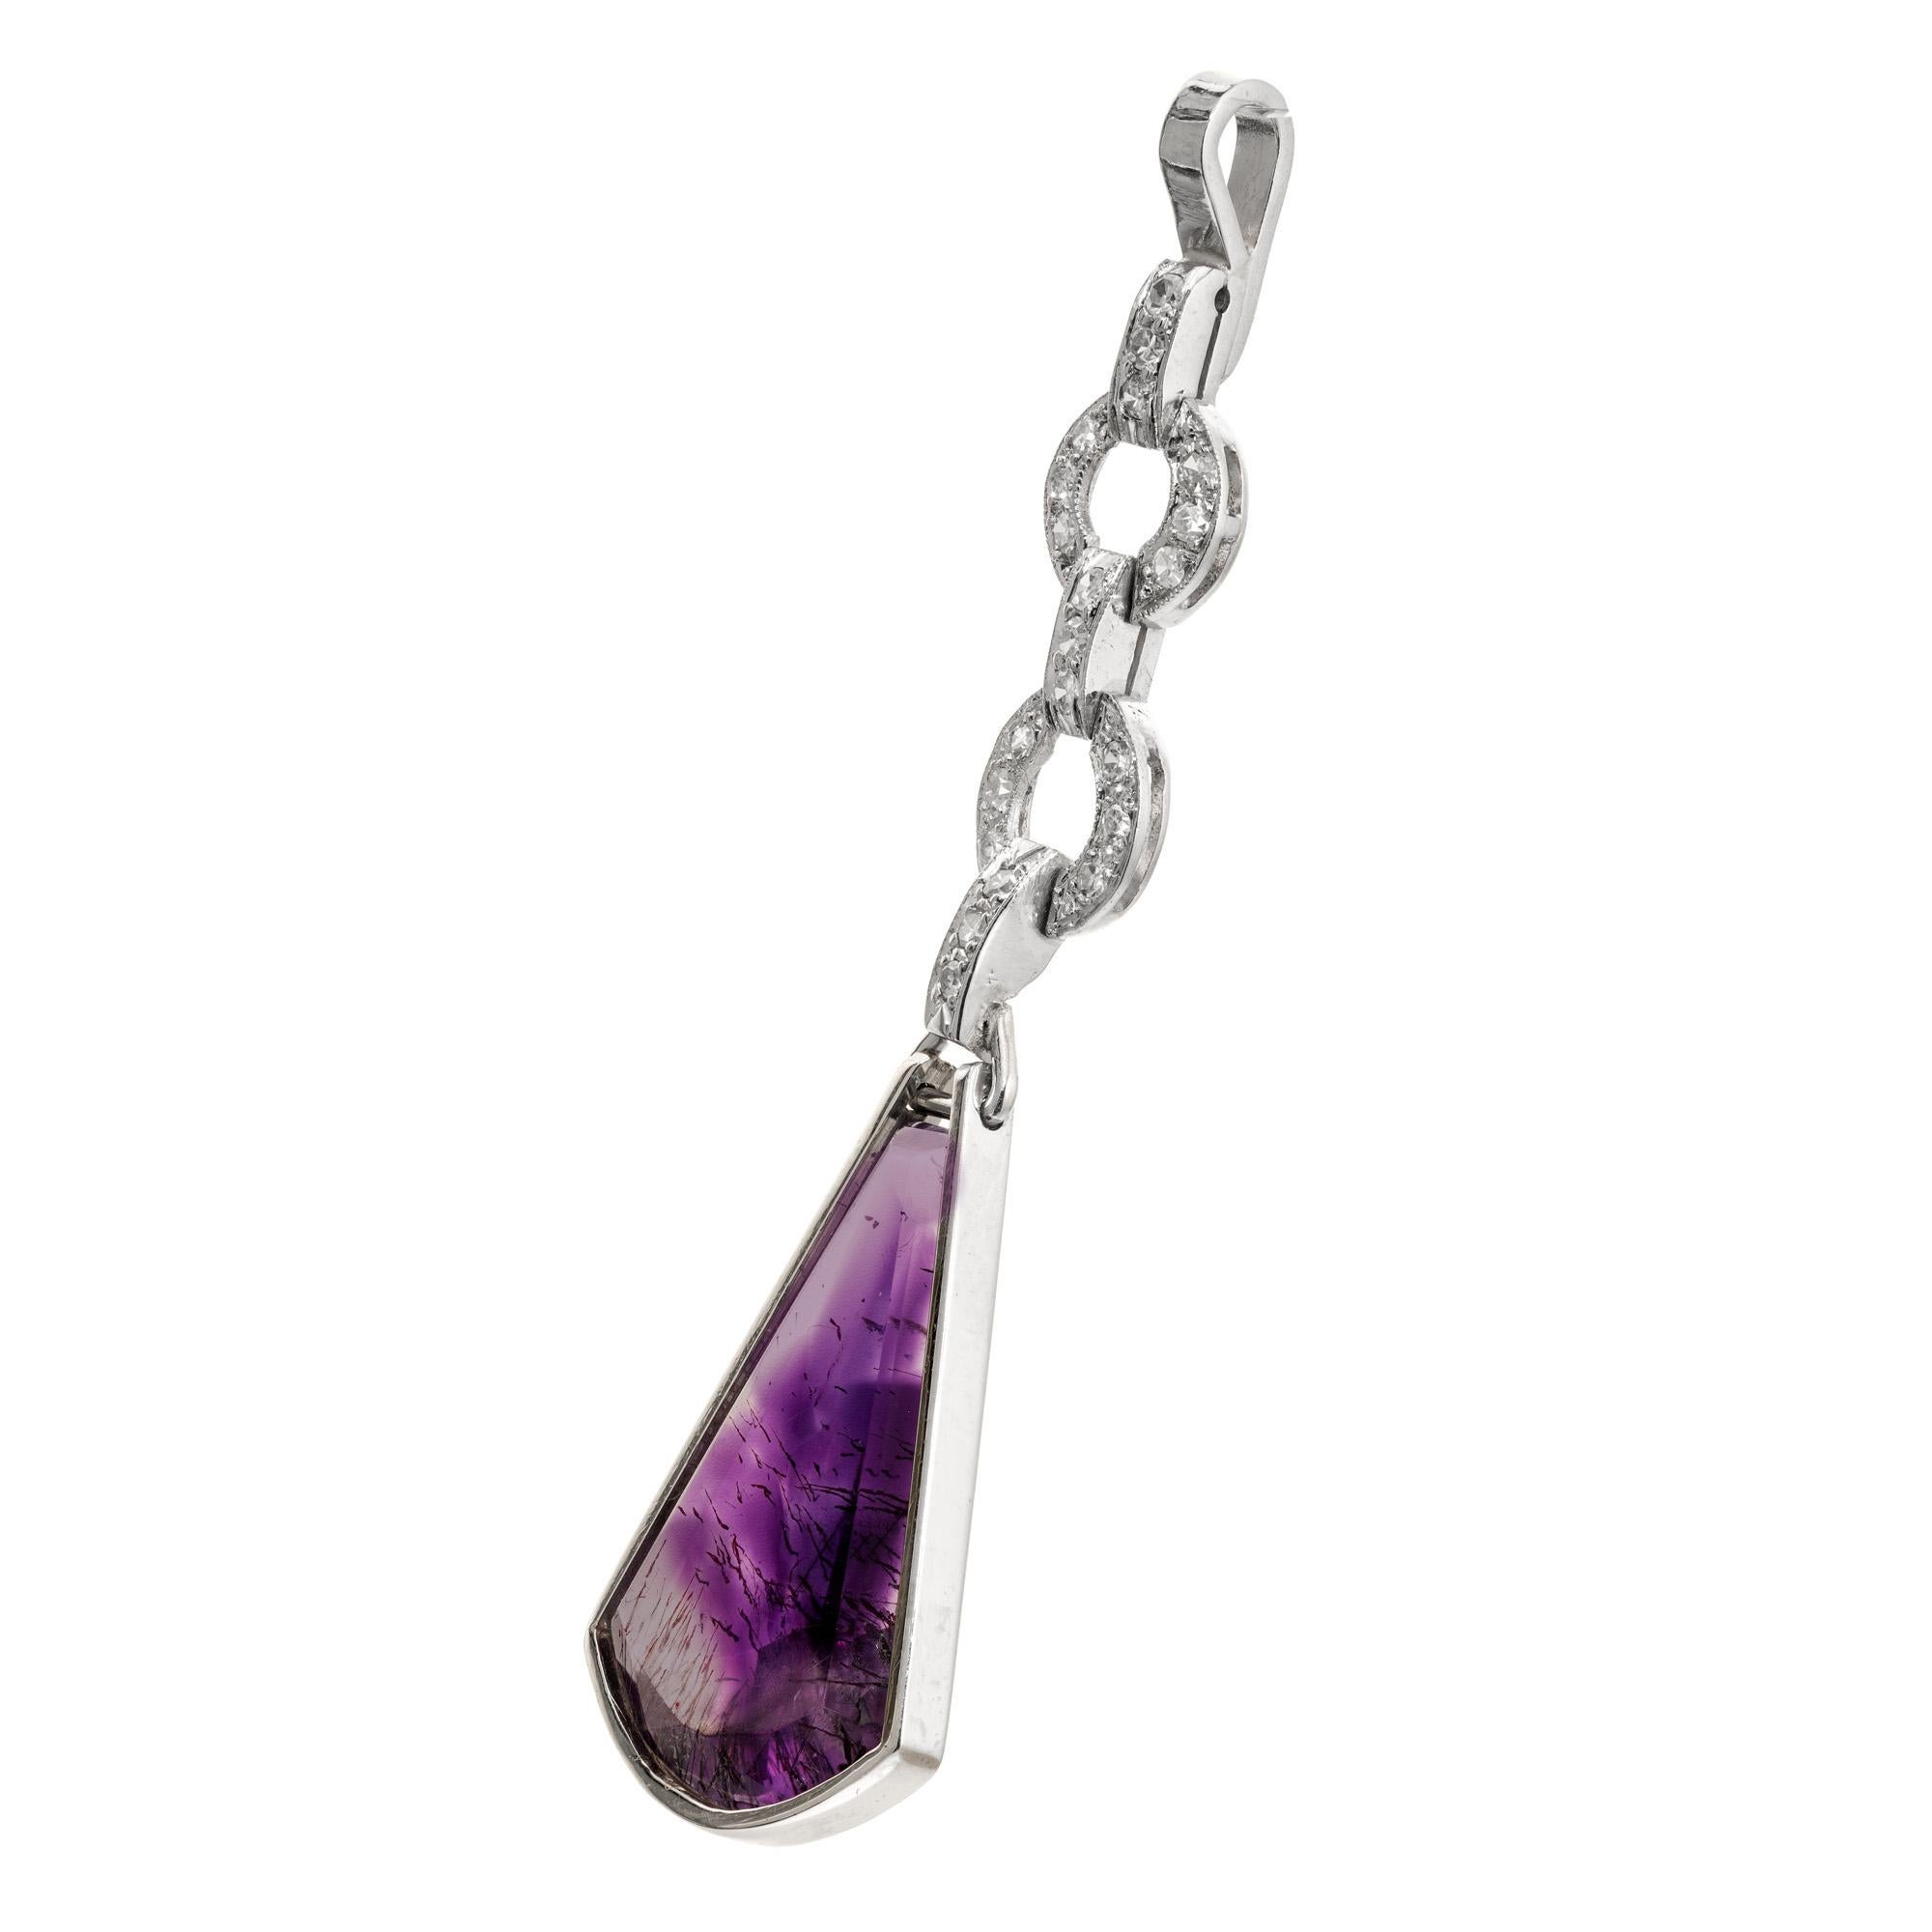 1920's Art Deco Handmade 5 section hinged amethyst and diamond pendant. Triangular 3.25 amethyst set in platinum with a 4 section diamond bail. The cut quartz amethyst has color zoning from clear quartz to deep purple. Rutile needles are in the